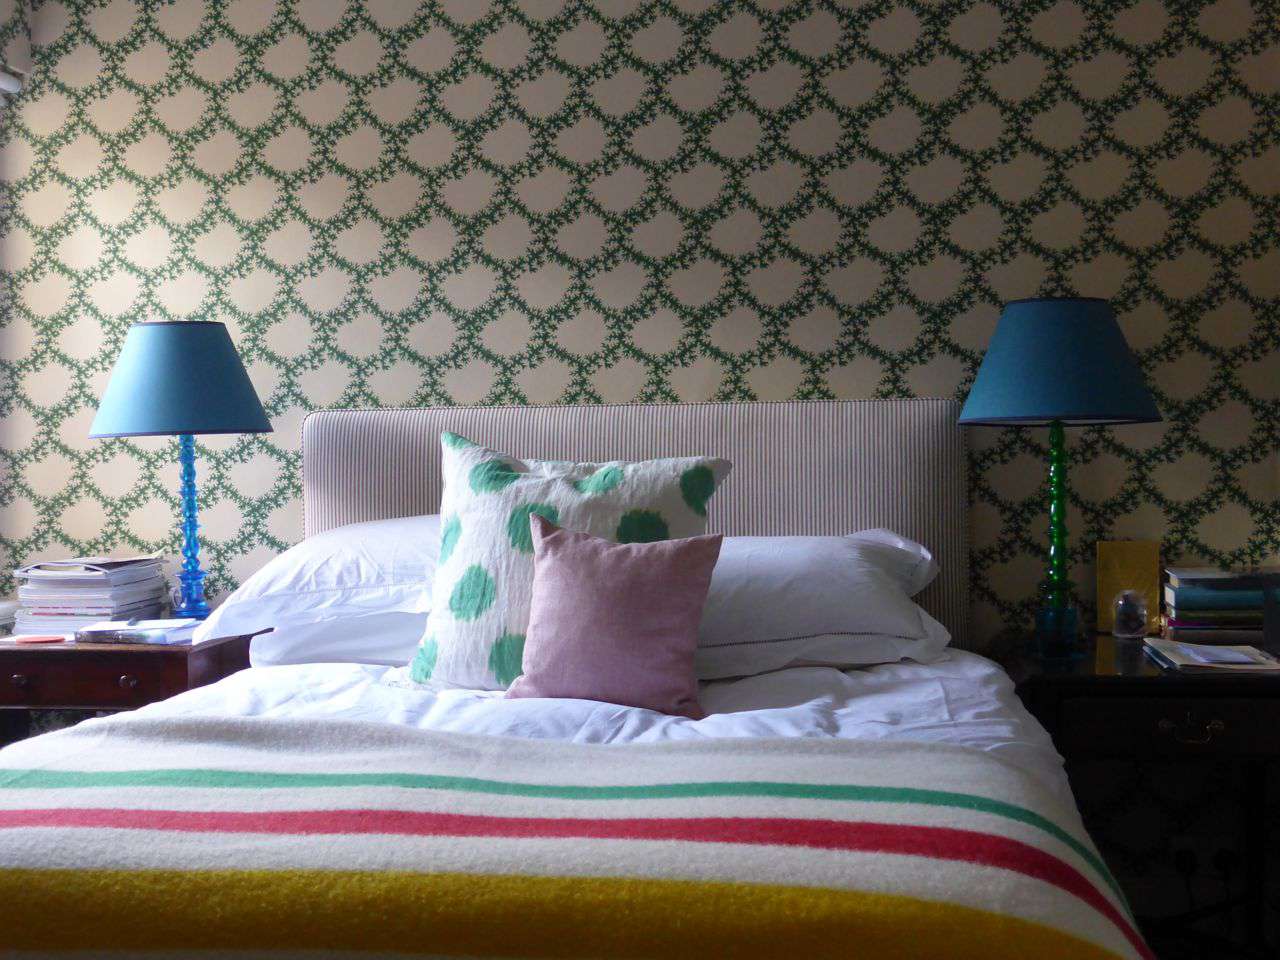 pattern and color enliven a small bedroom